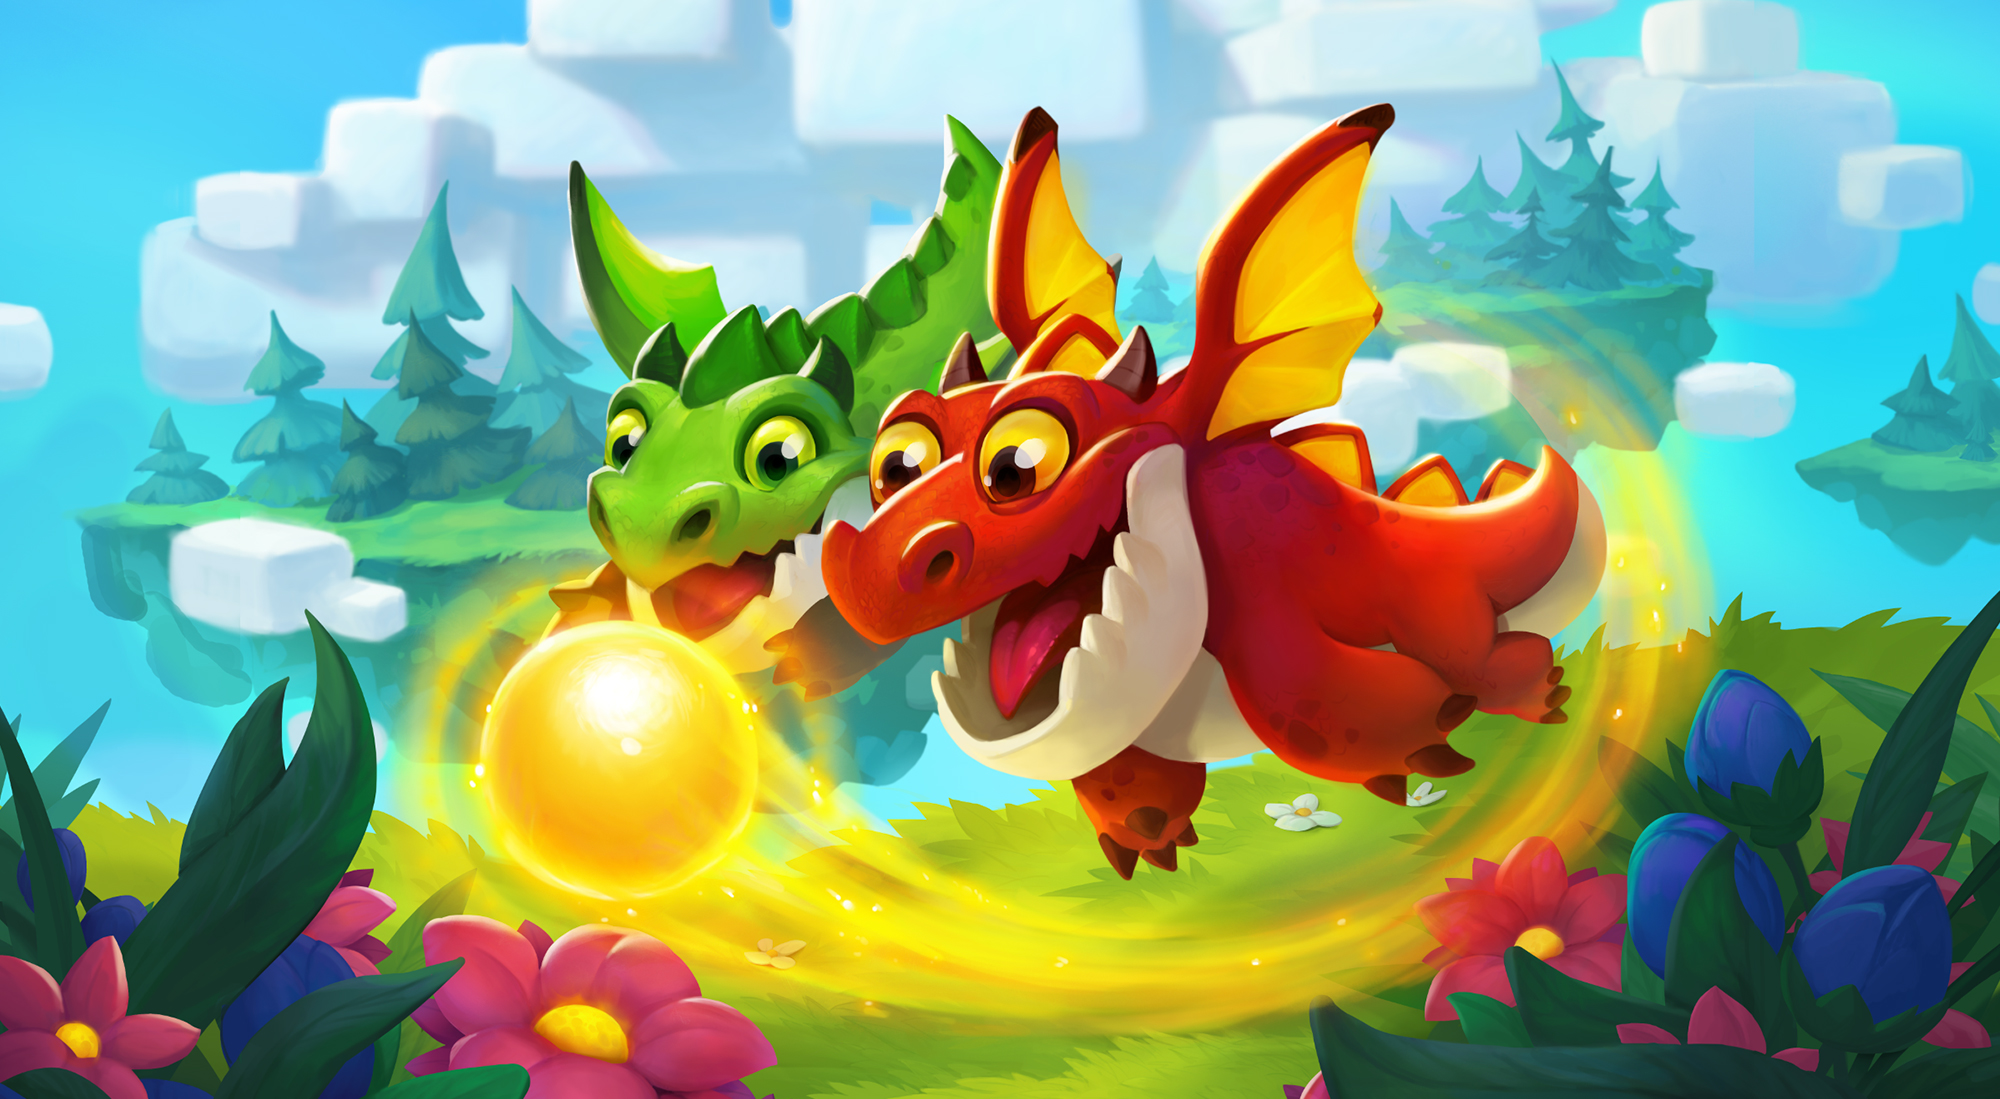 Puzzle & Dragons – Apps no Google Play